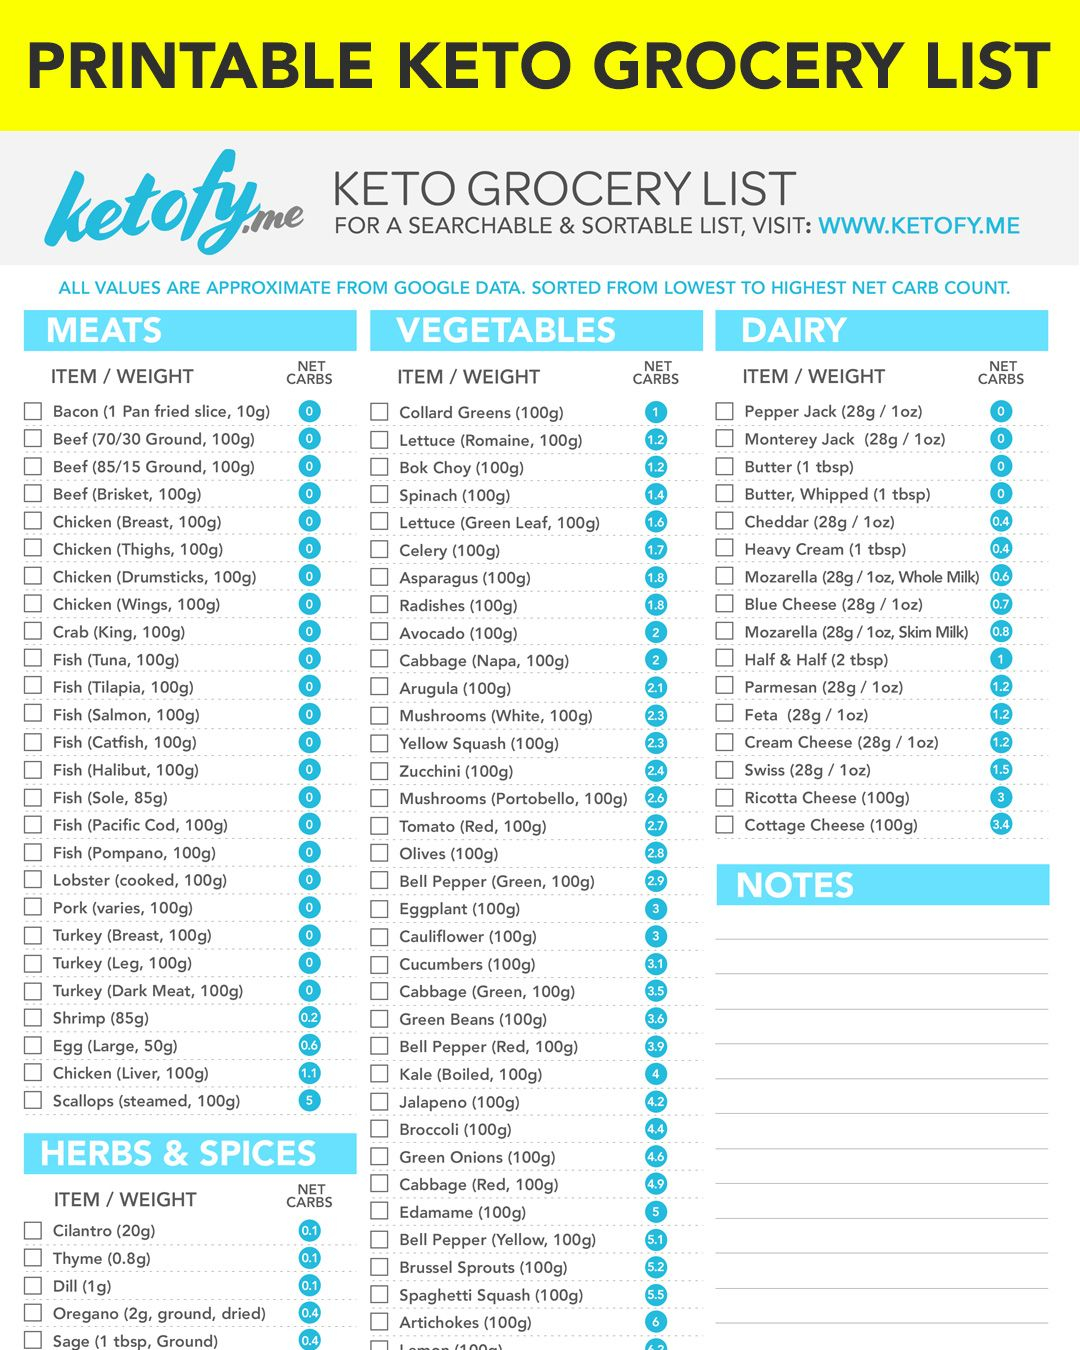 Keto Grocery List With Net Carbs Printable Downloadable 